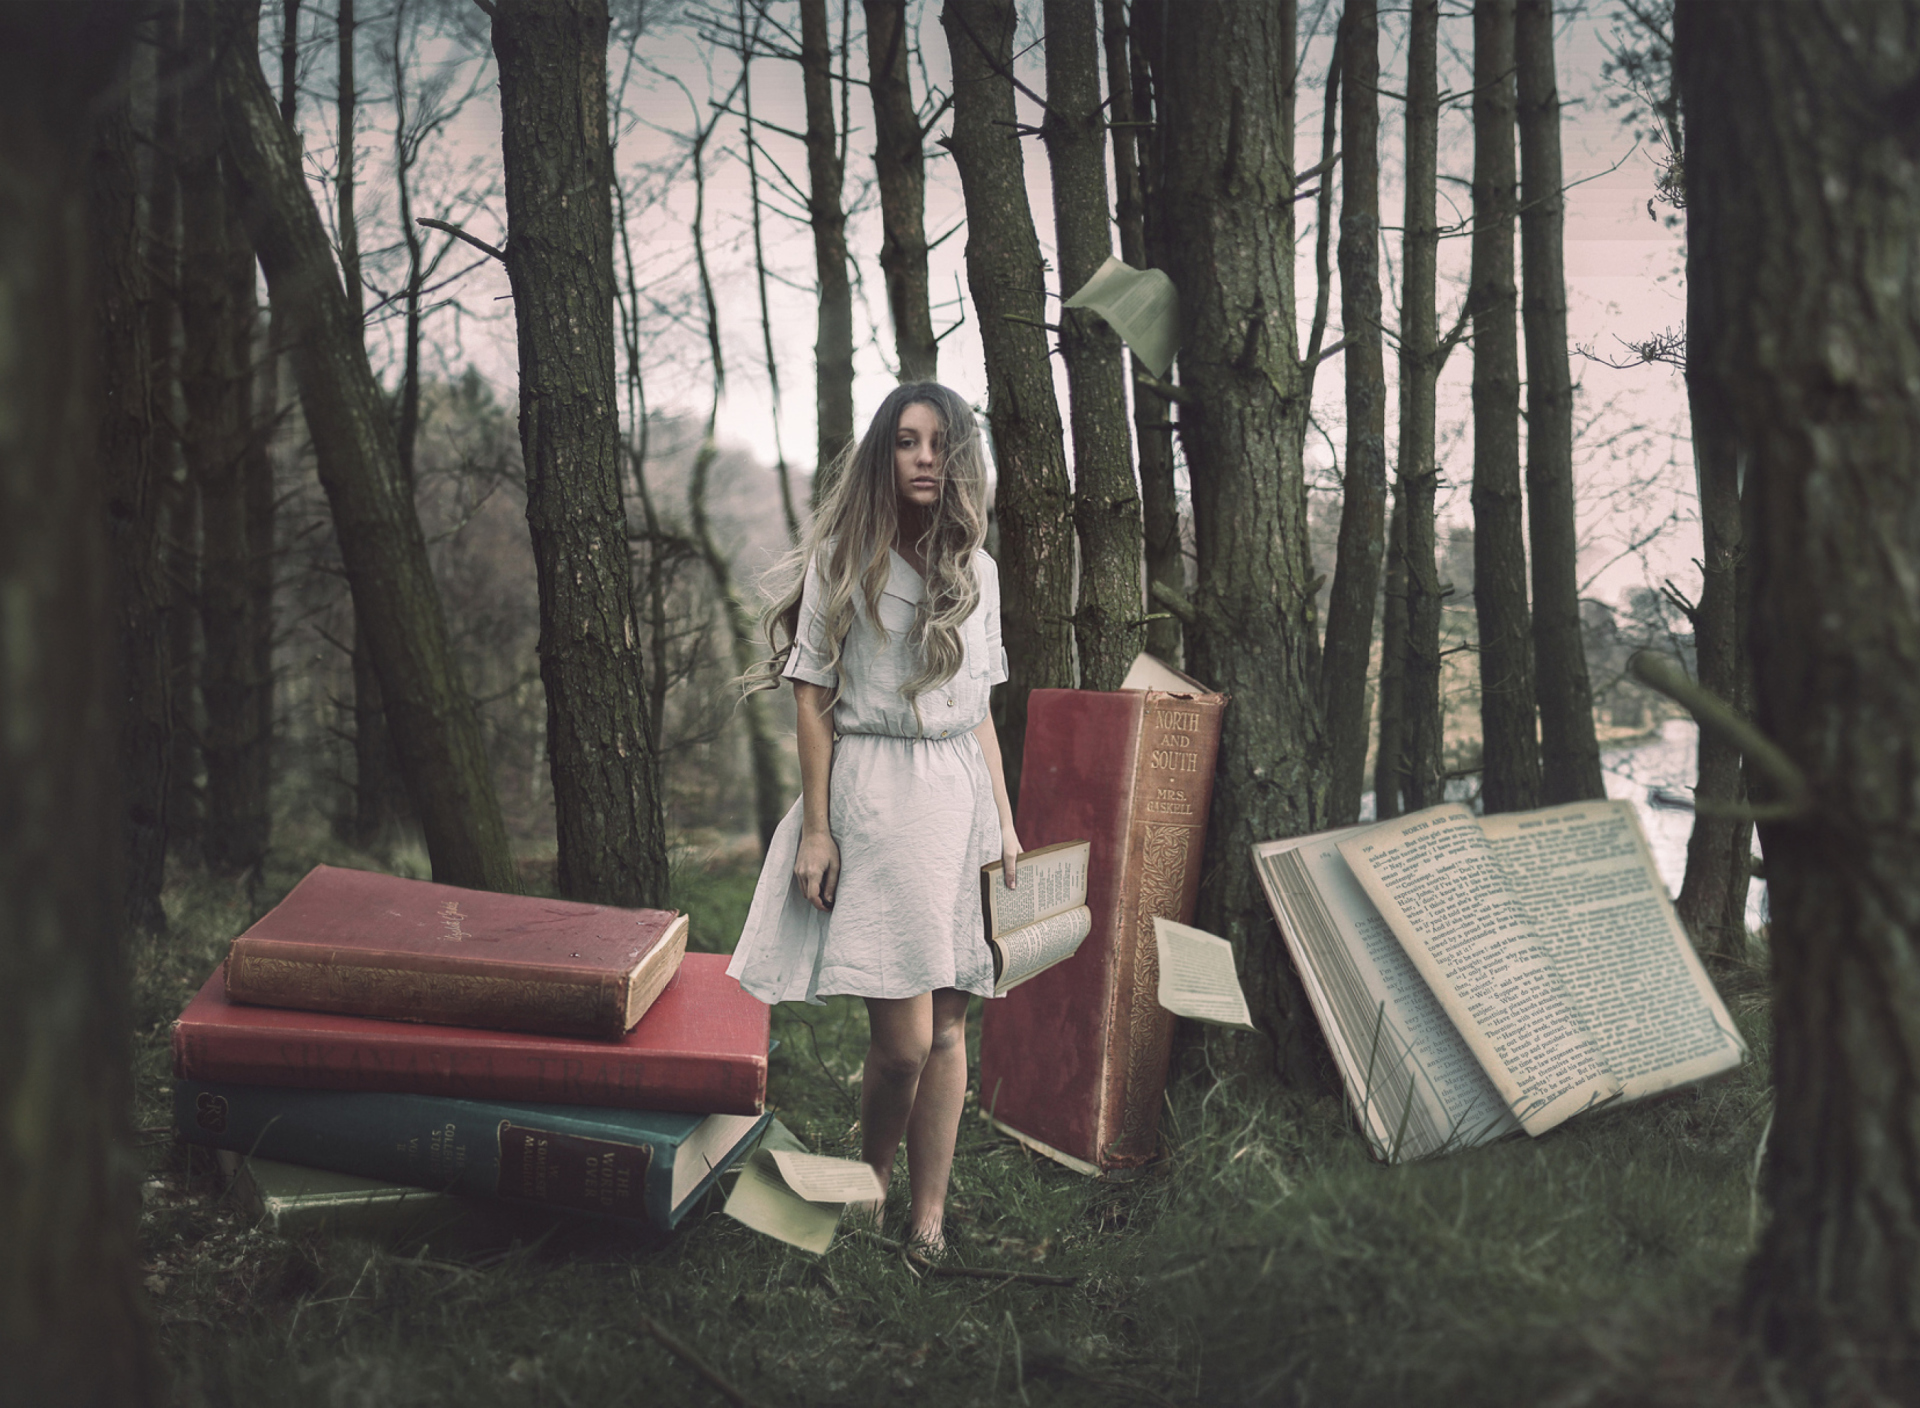 Fondo de pantalla Forest Nymph Surrounded By Books 1920x1408